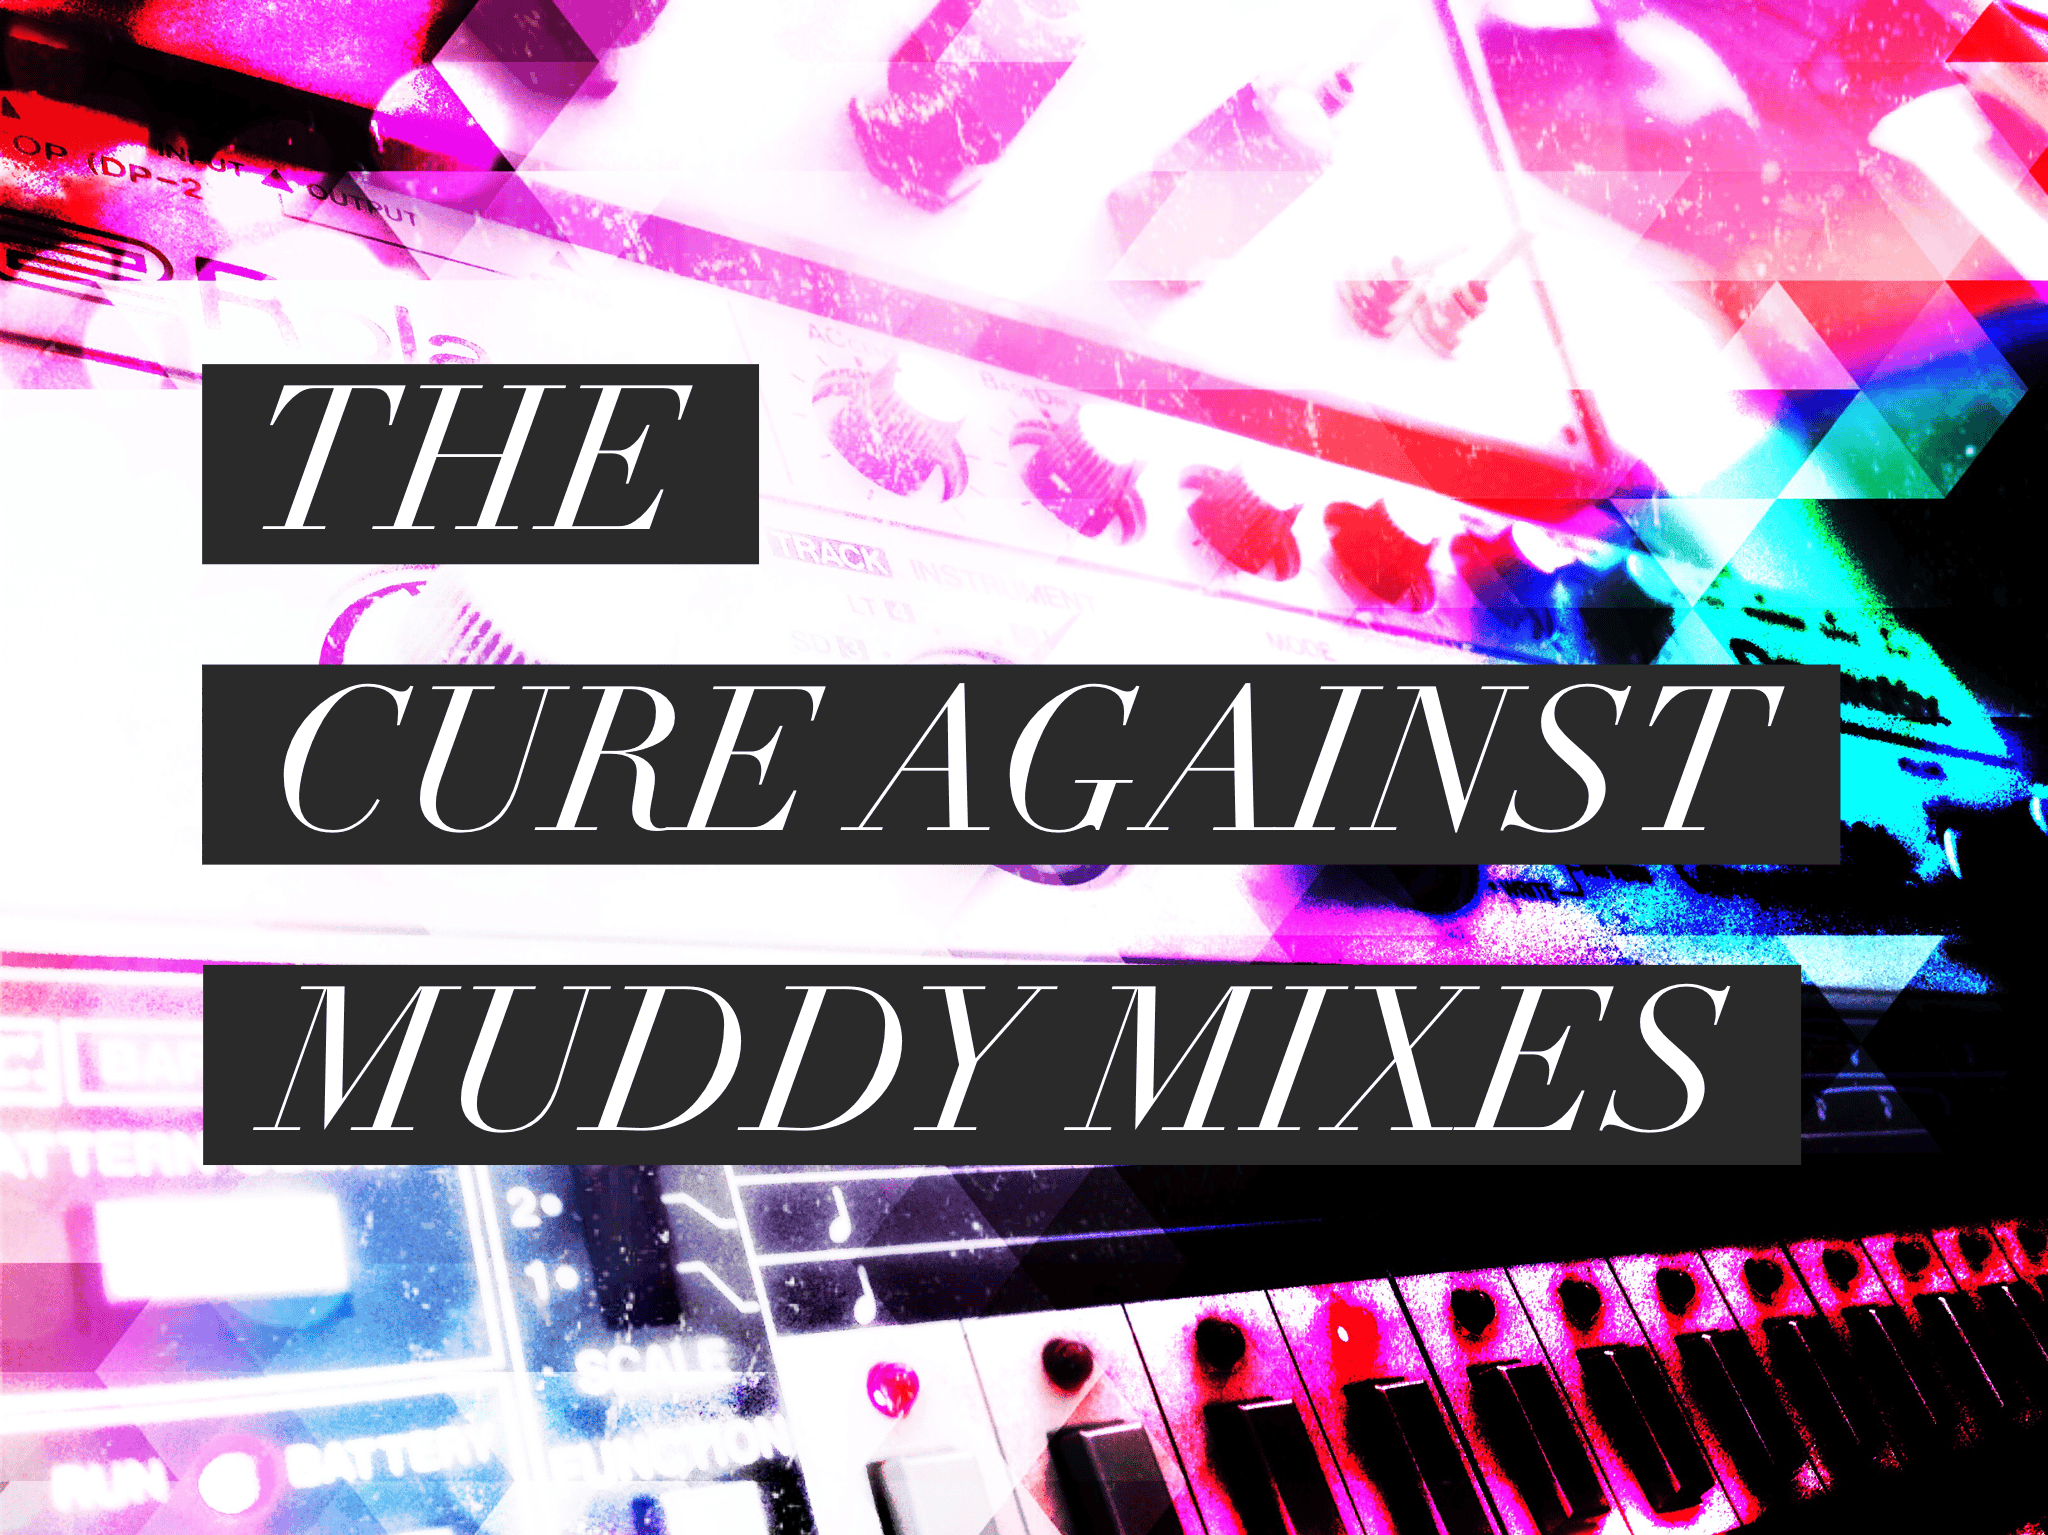 The Cure Against Muddy Mixes